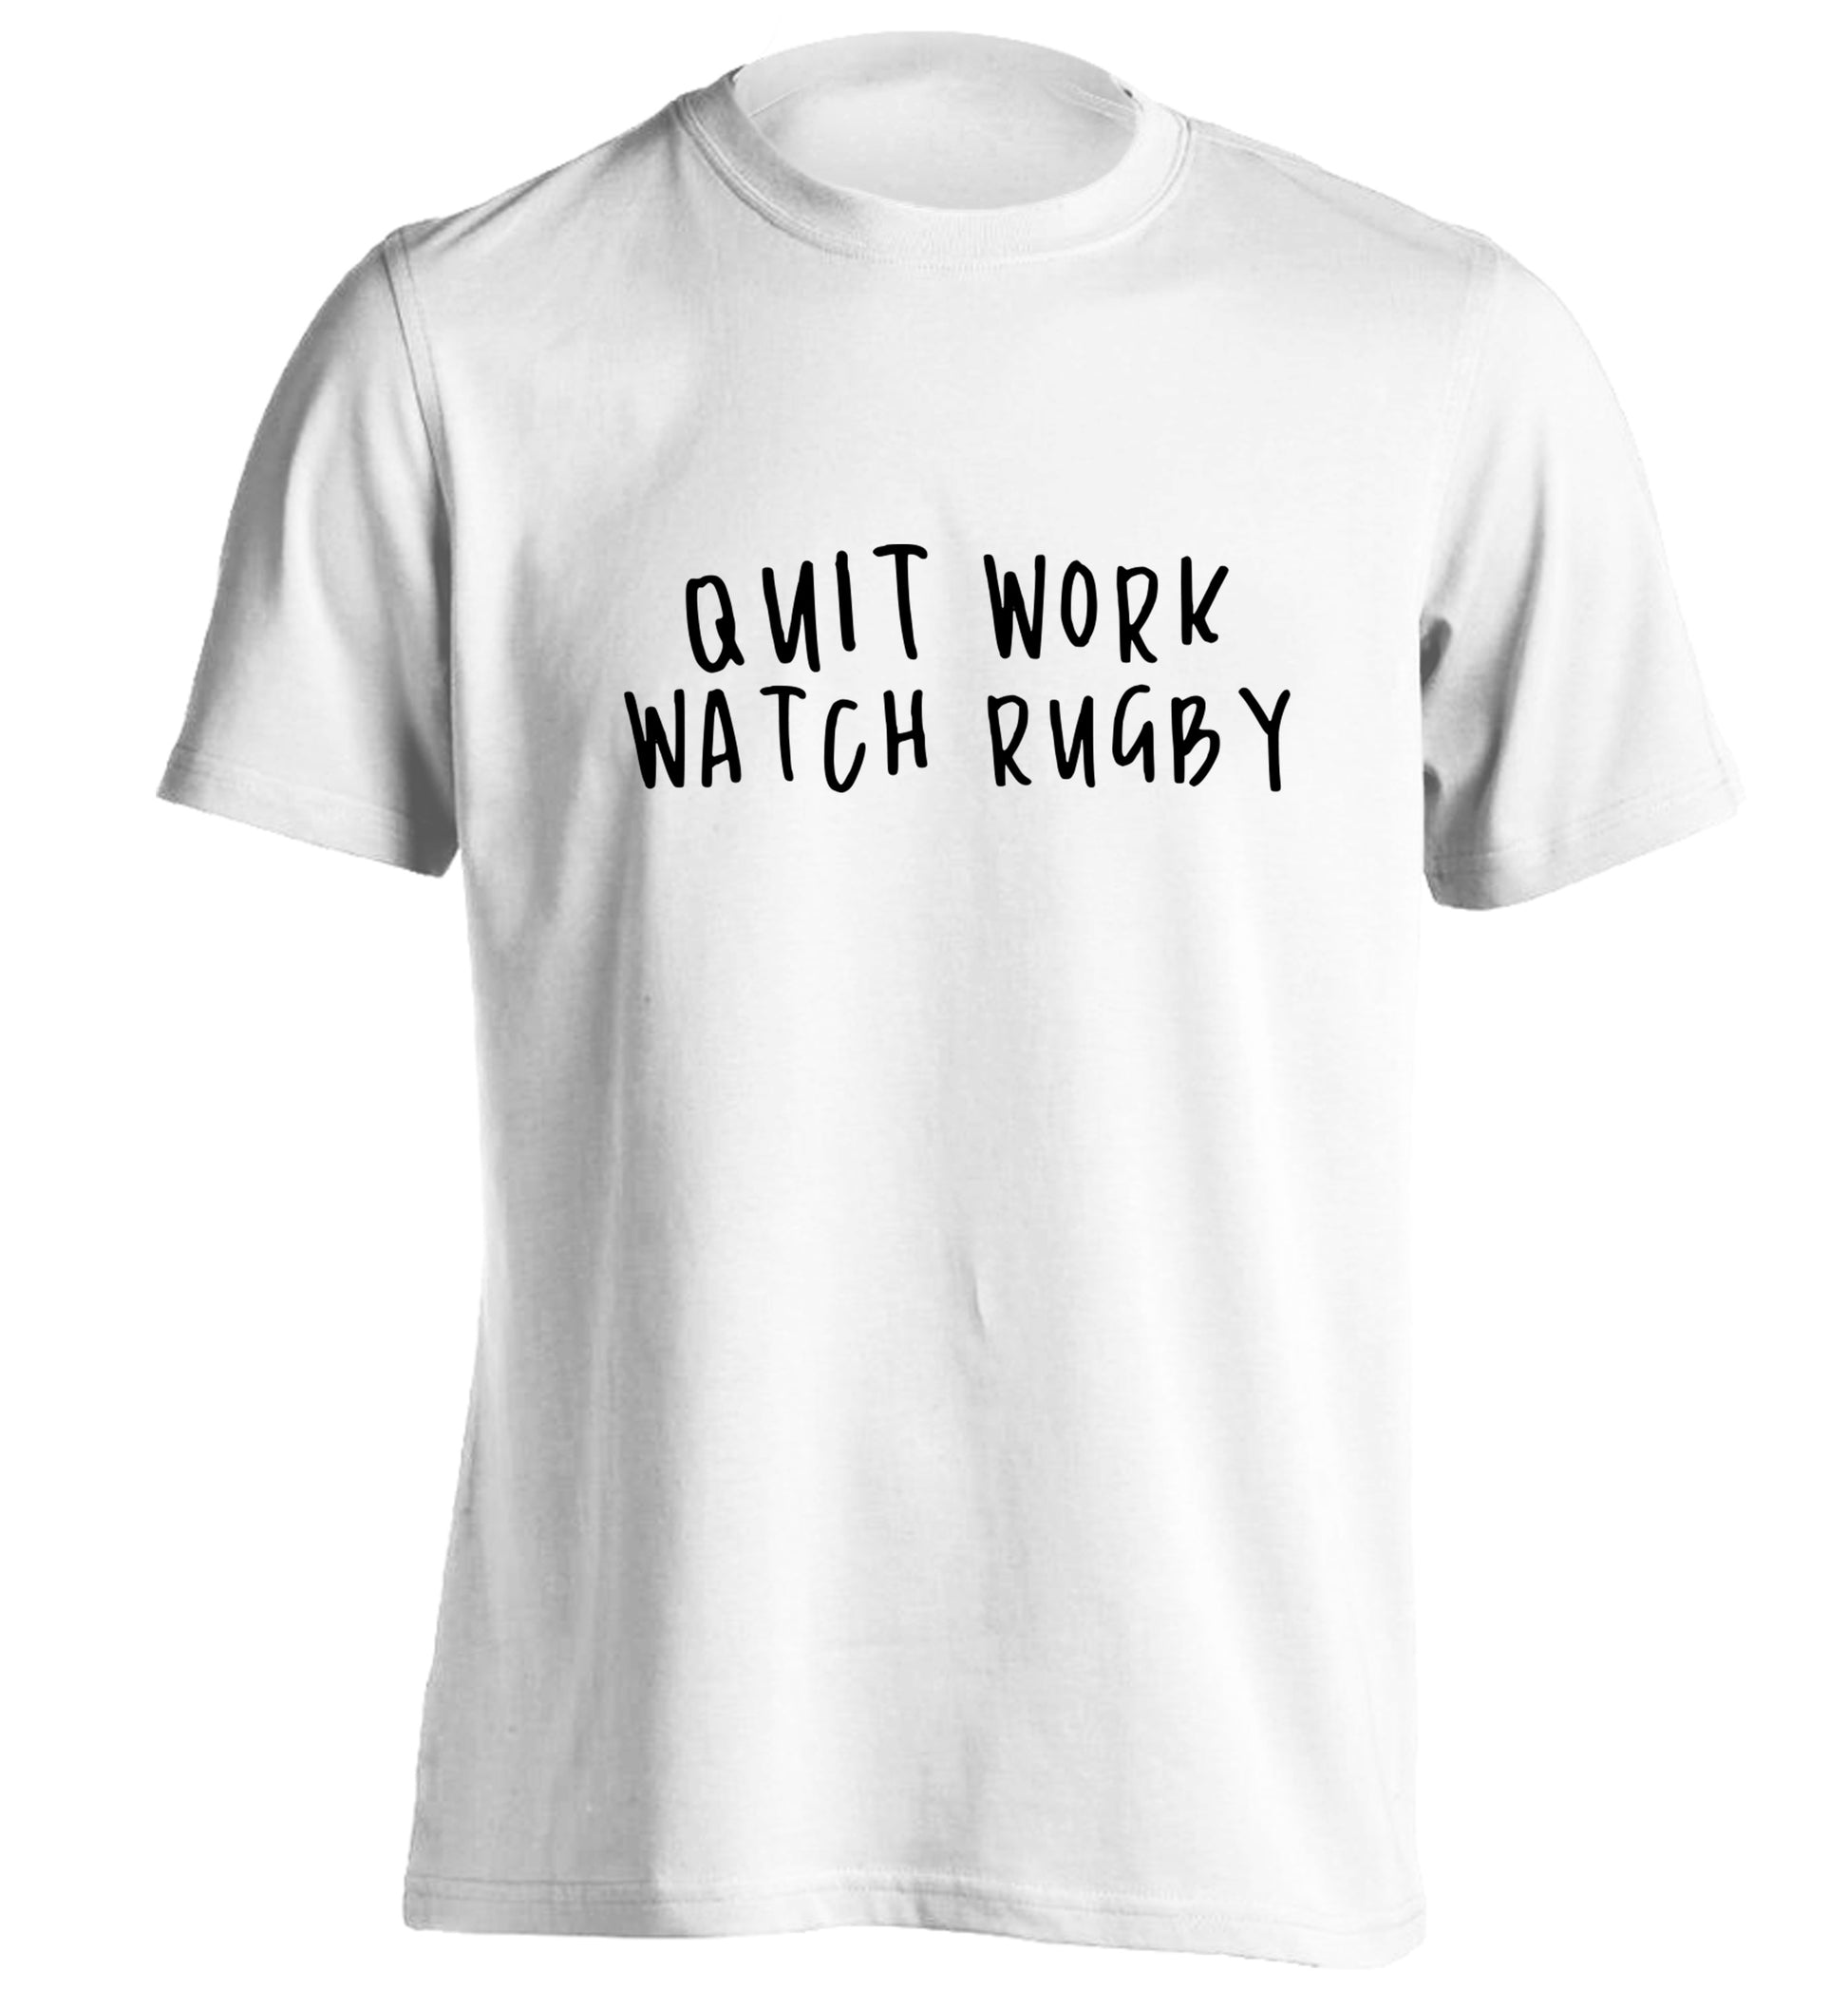 Quit work watch rugby adults unisex white Tshirt 2XL